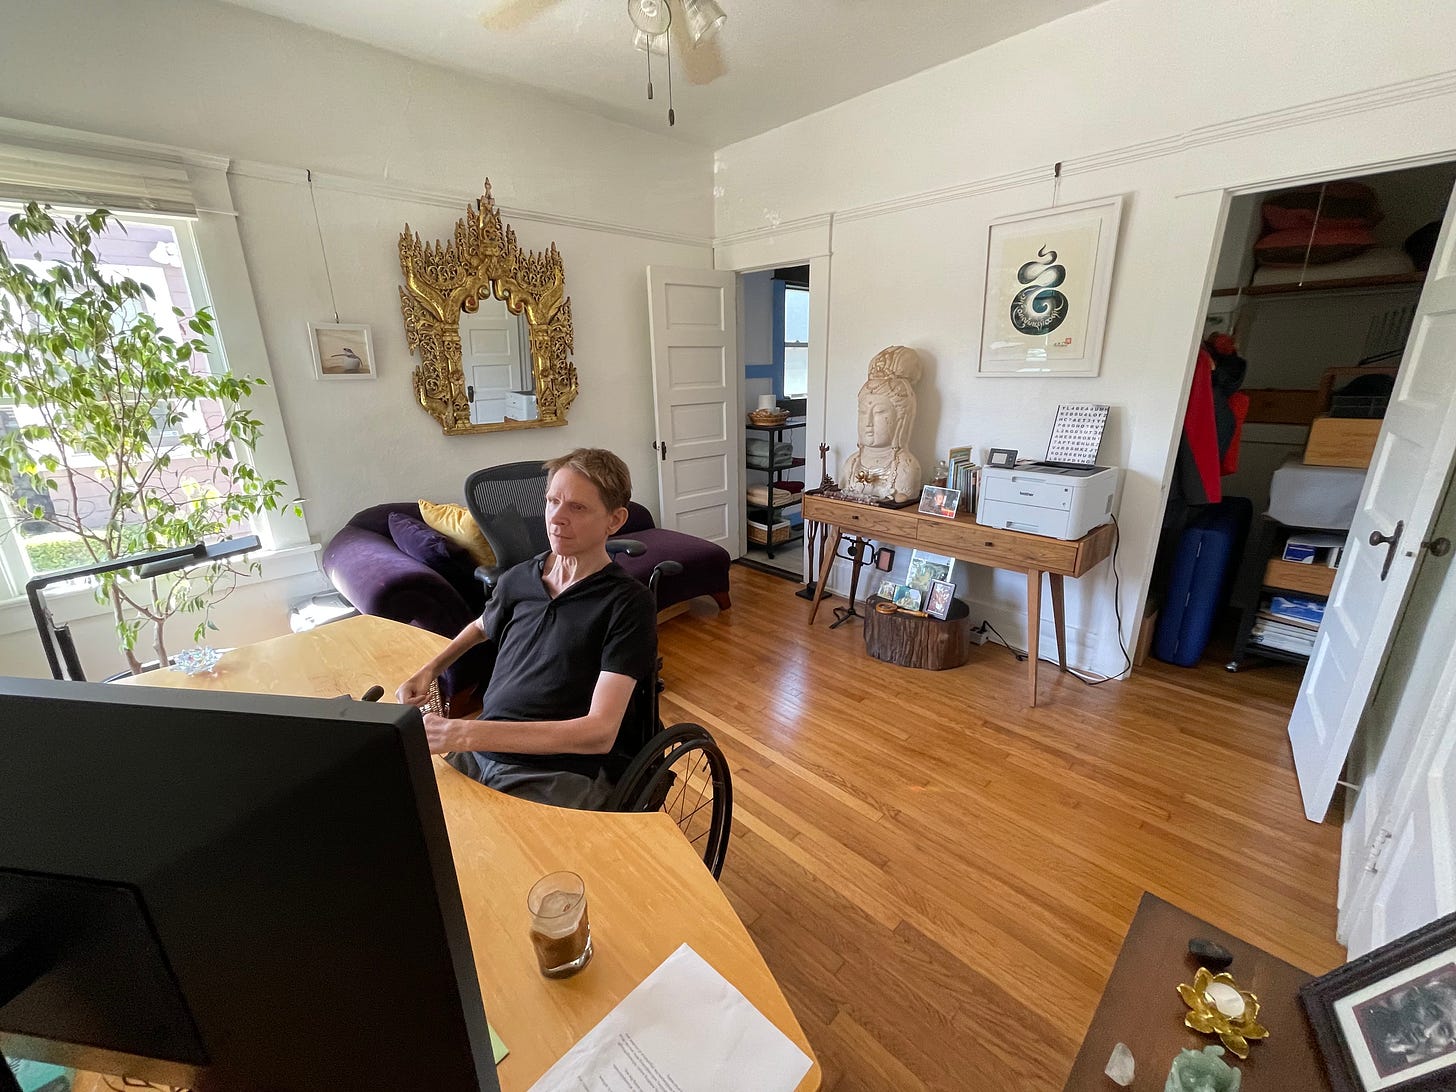 Kabir at home at work in his office. A small light filled room, a small tree in the corner to the left, a gold and ornate mirror on the wall, and Buddhist sculpture and printer on a small table along the back wall. To the right frame, to the left of Kabir as he sits at his desk, a small altar with a photo of Geshe Wangyal.